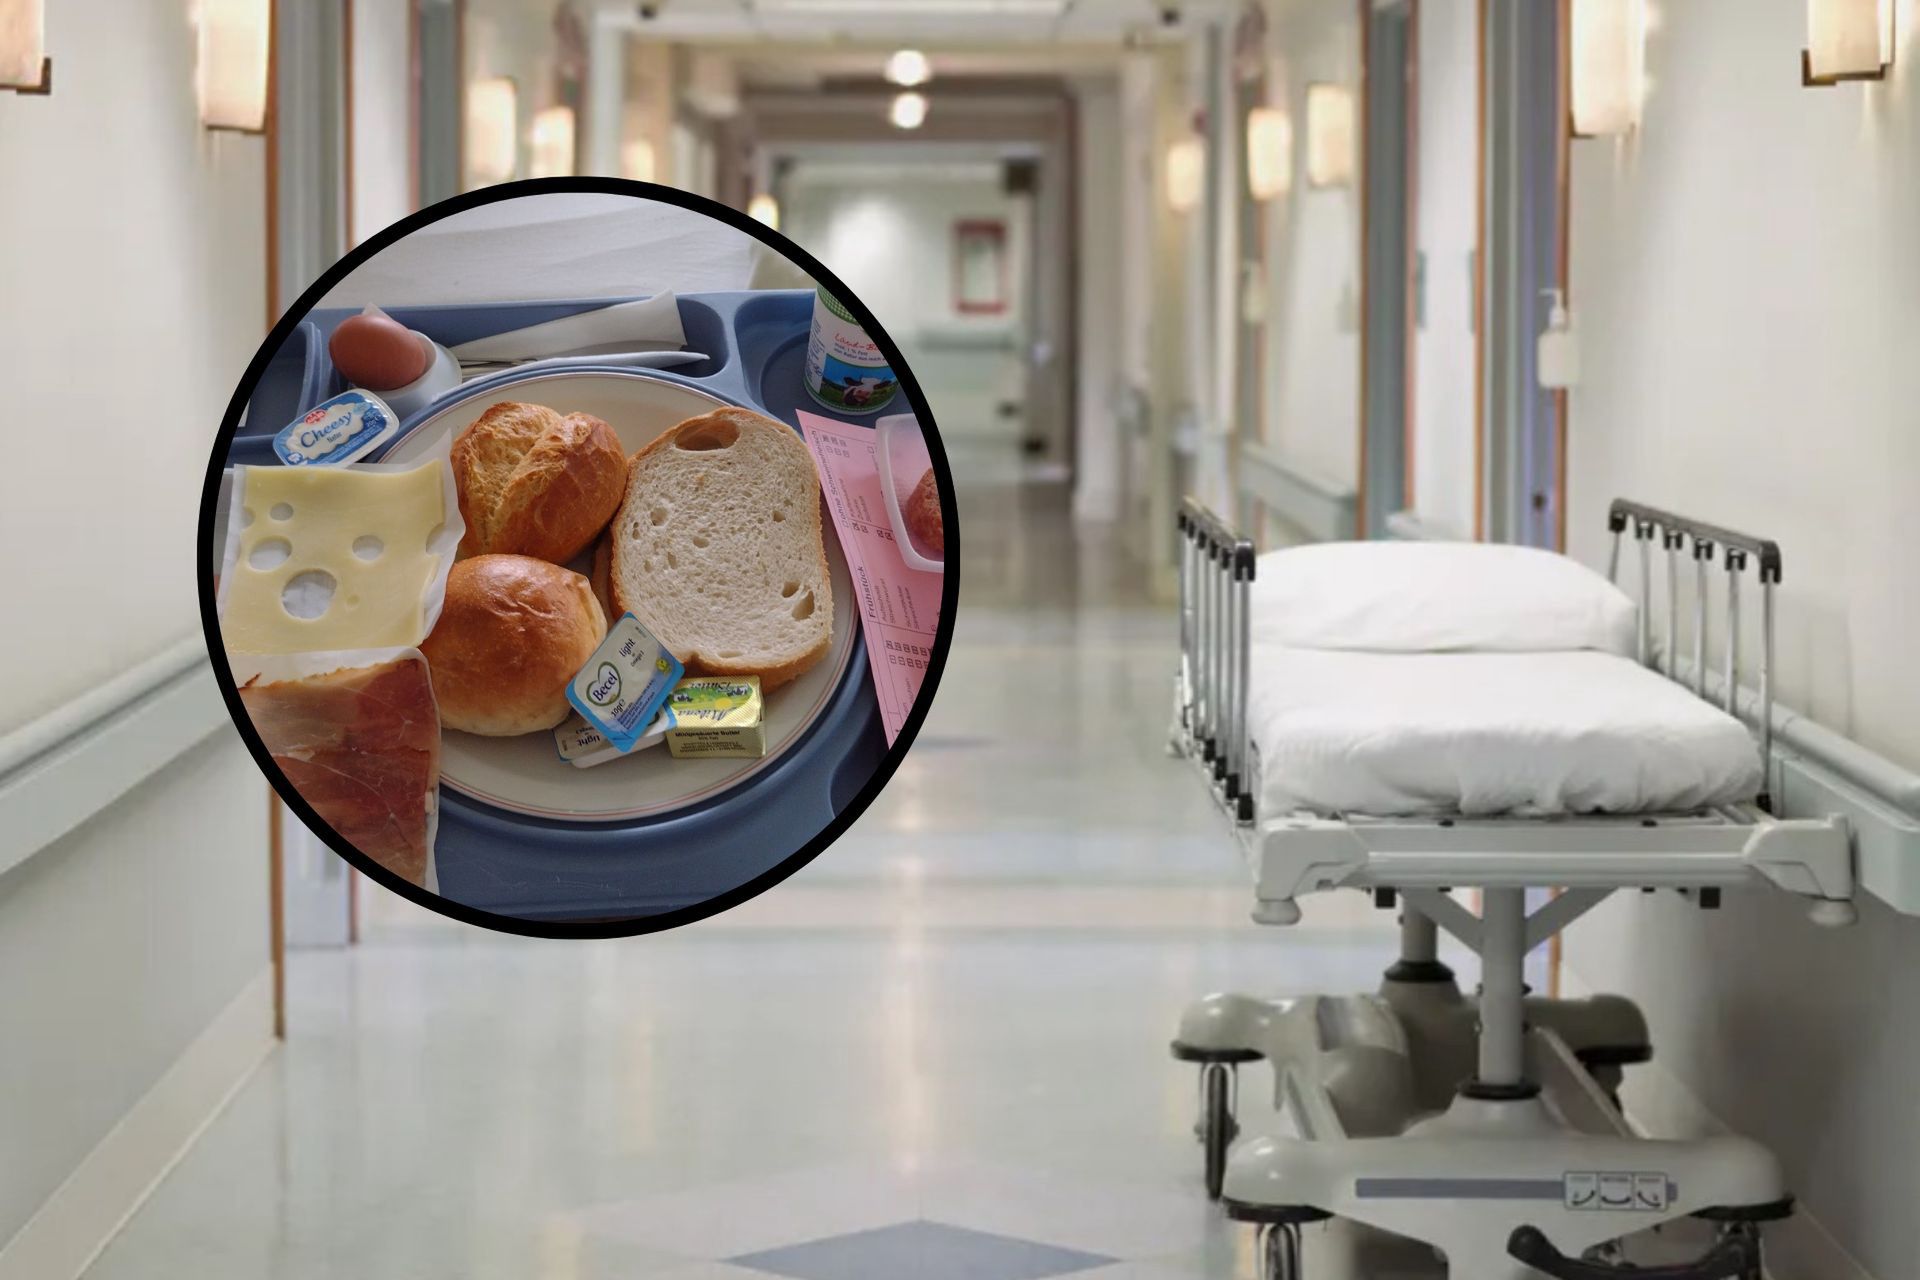 This is how they feed in a German hospital. The patient was unable to speak.